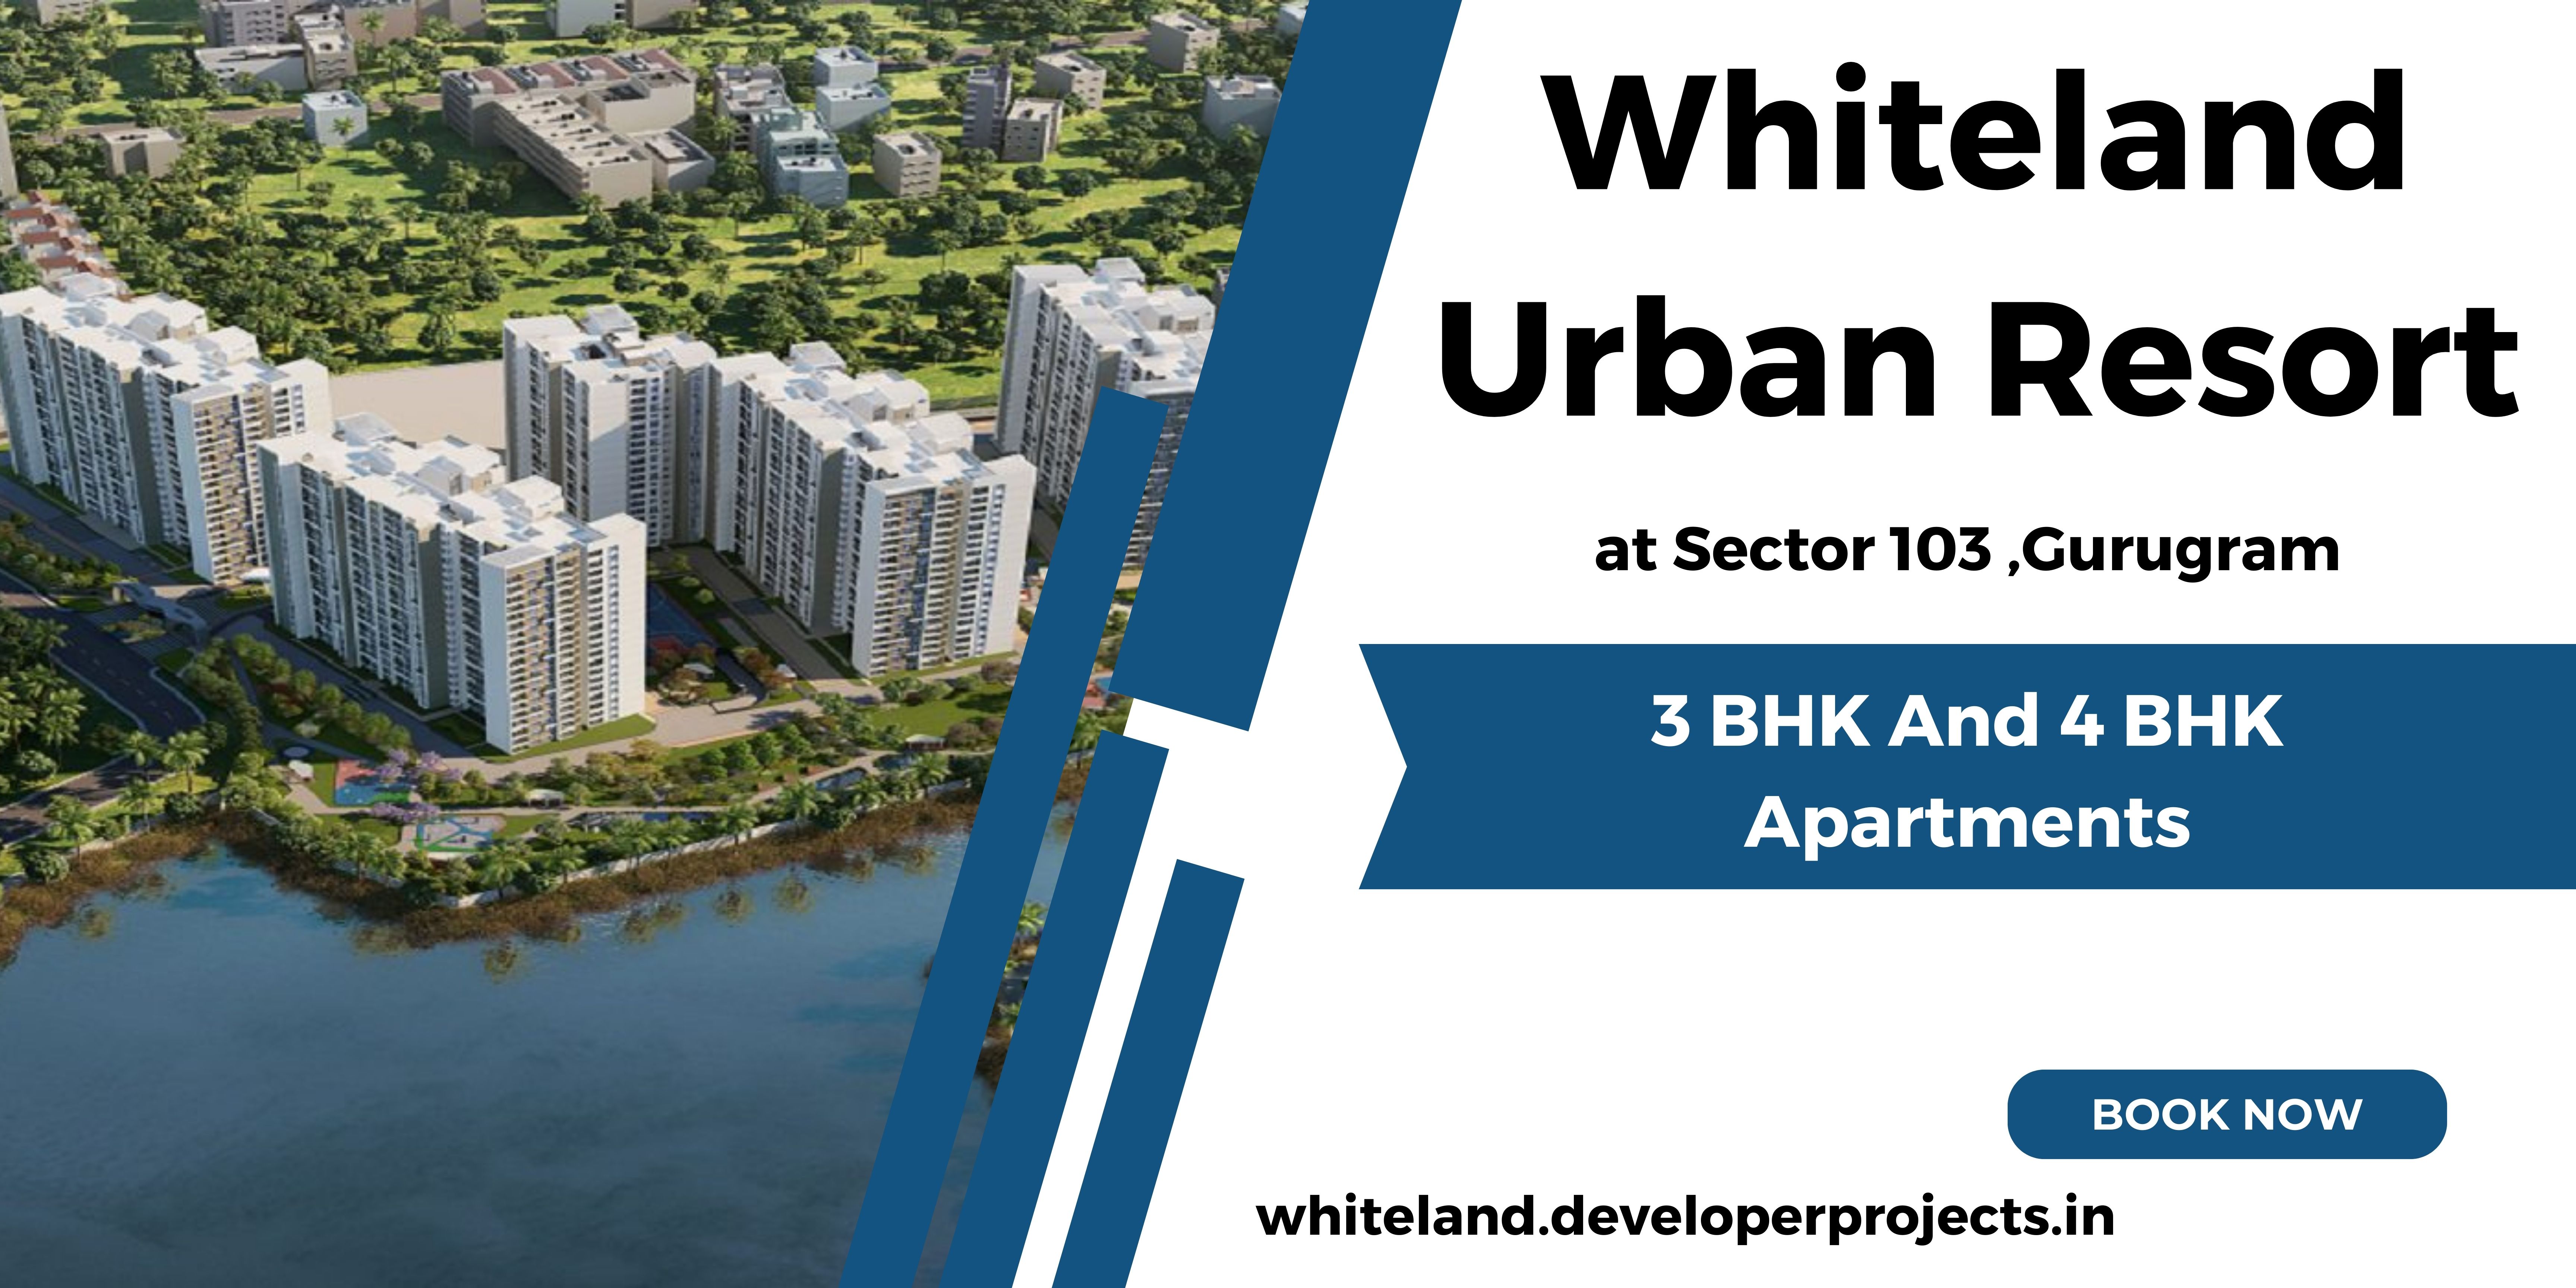 Whiteland Urban Resort Sector 103 Gurugram - One Destination With Multiple Connections